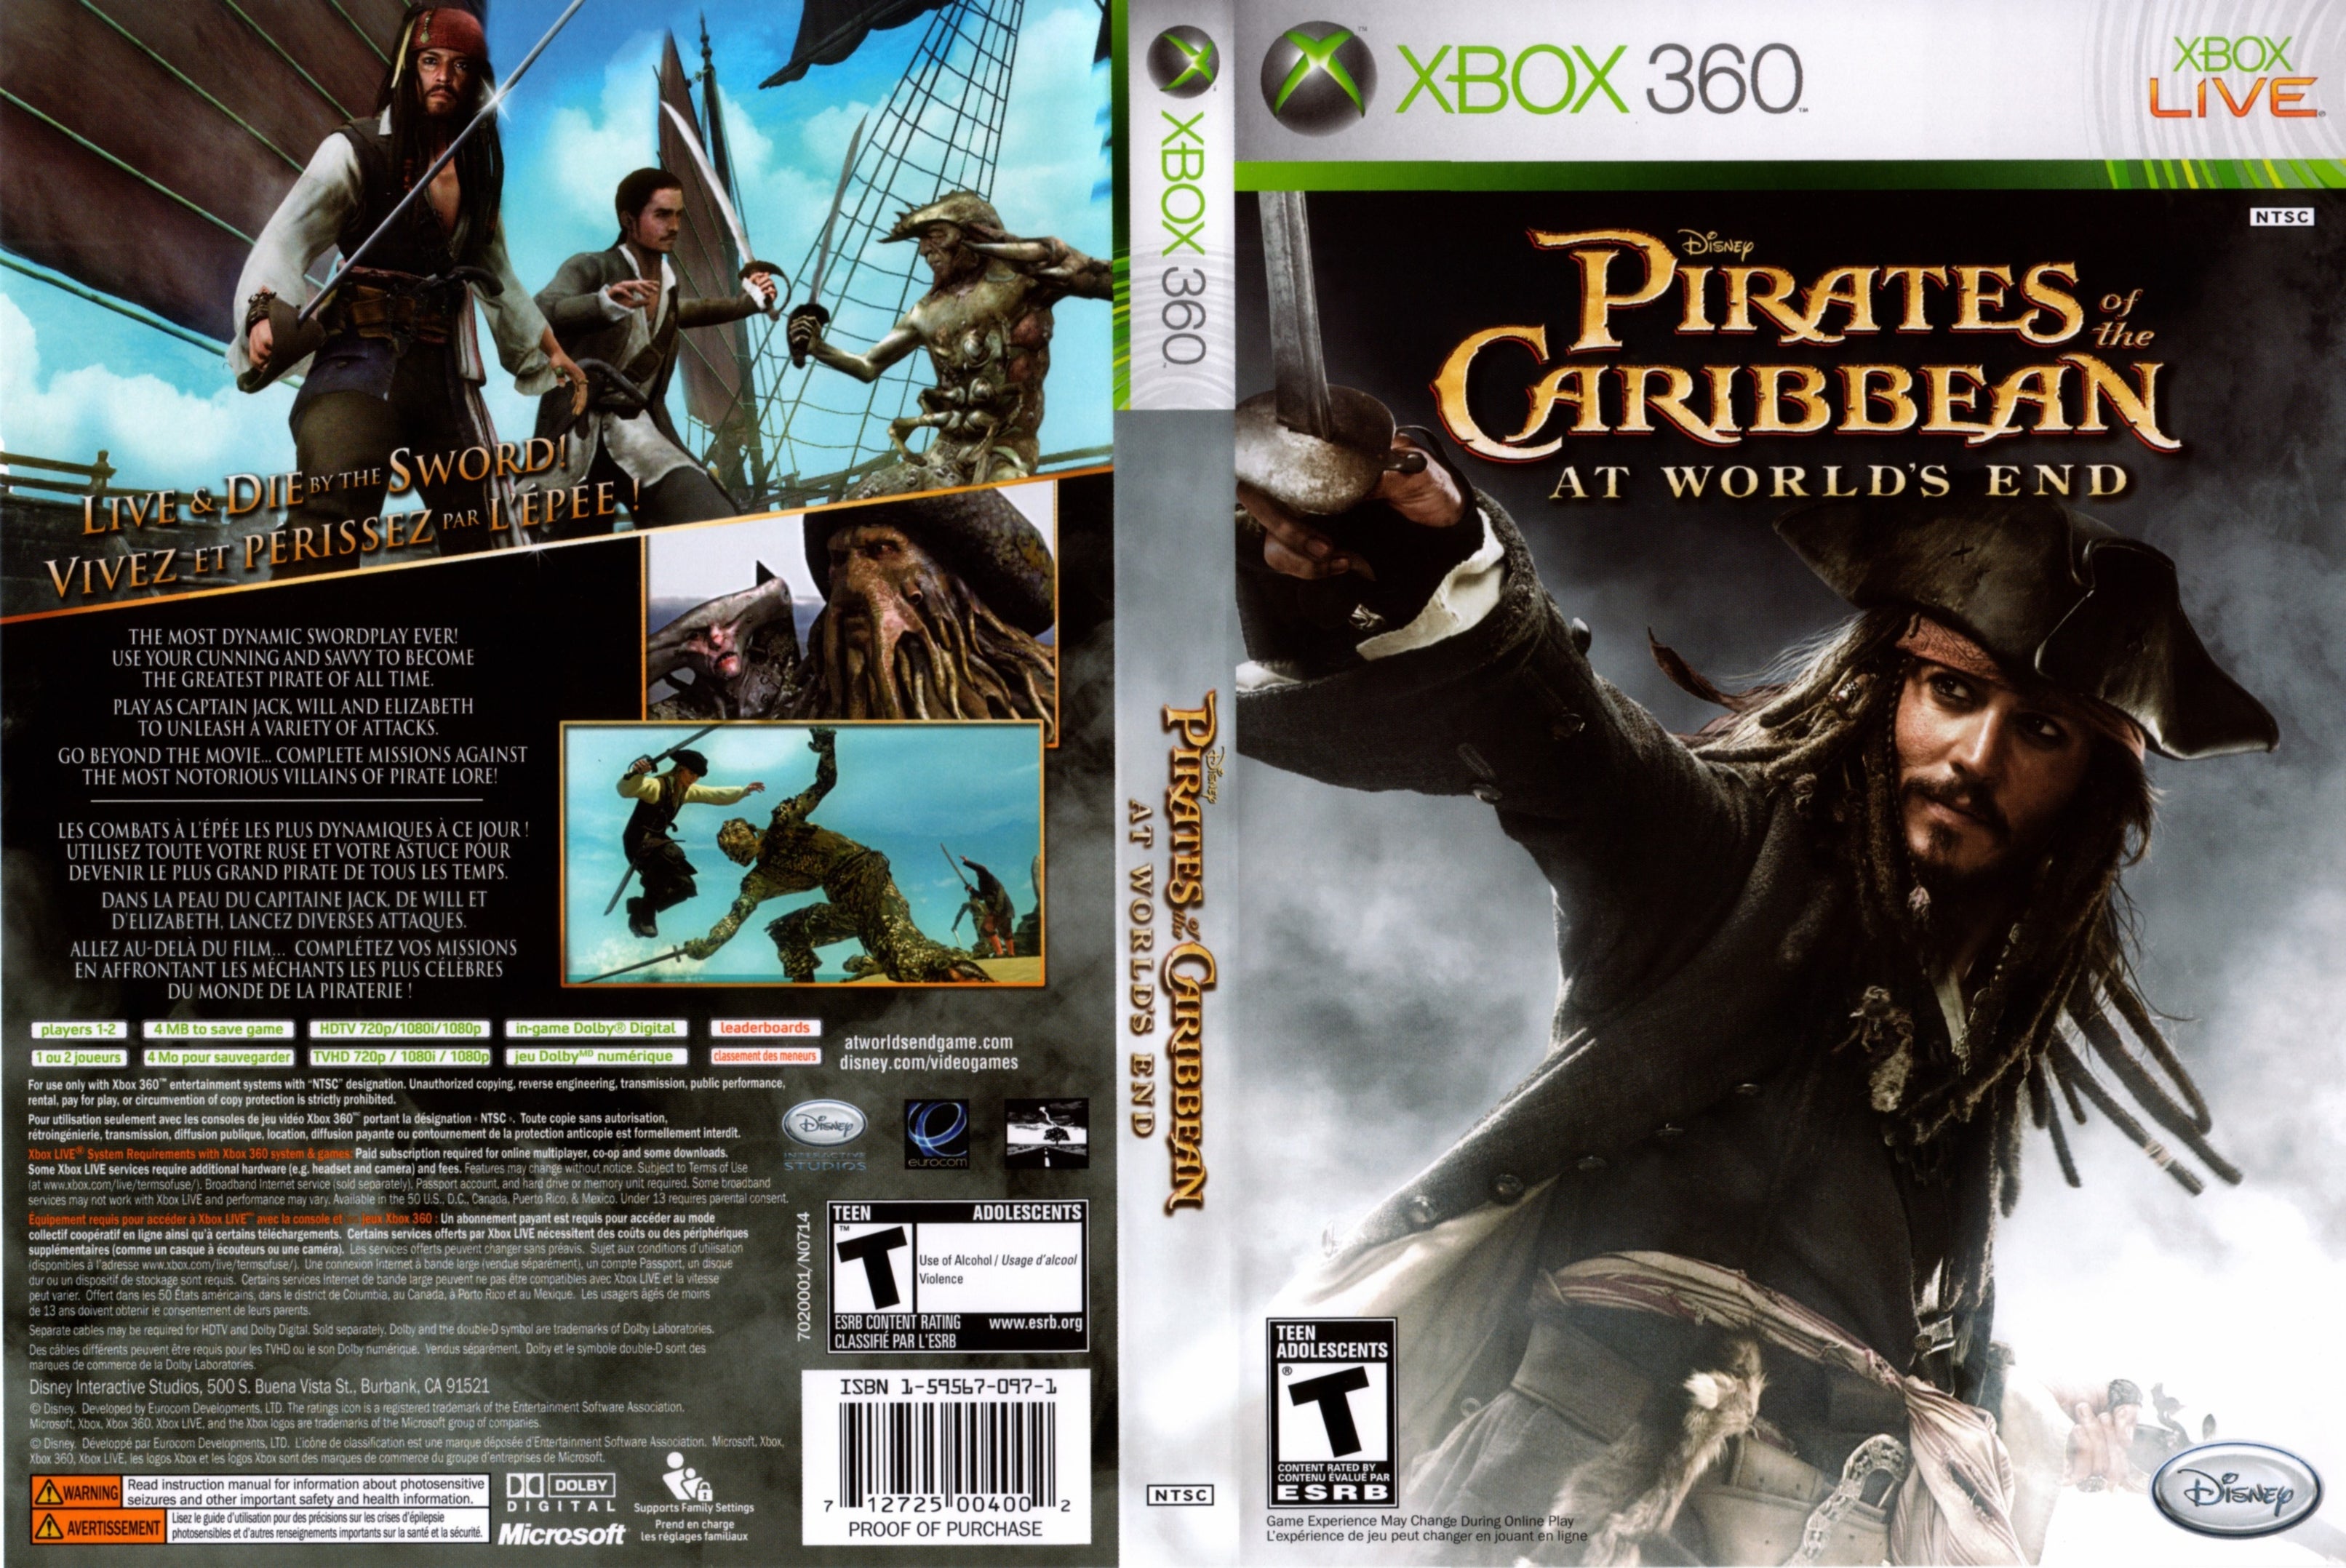 Pirates of the Caribbean: At World's End (video game)